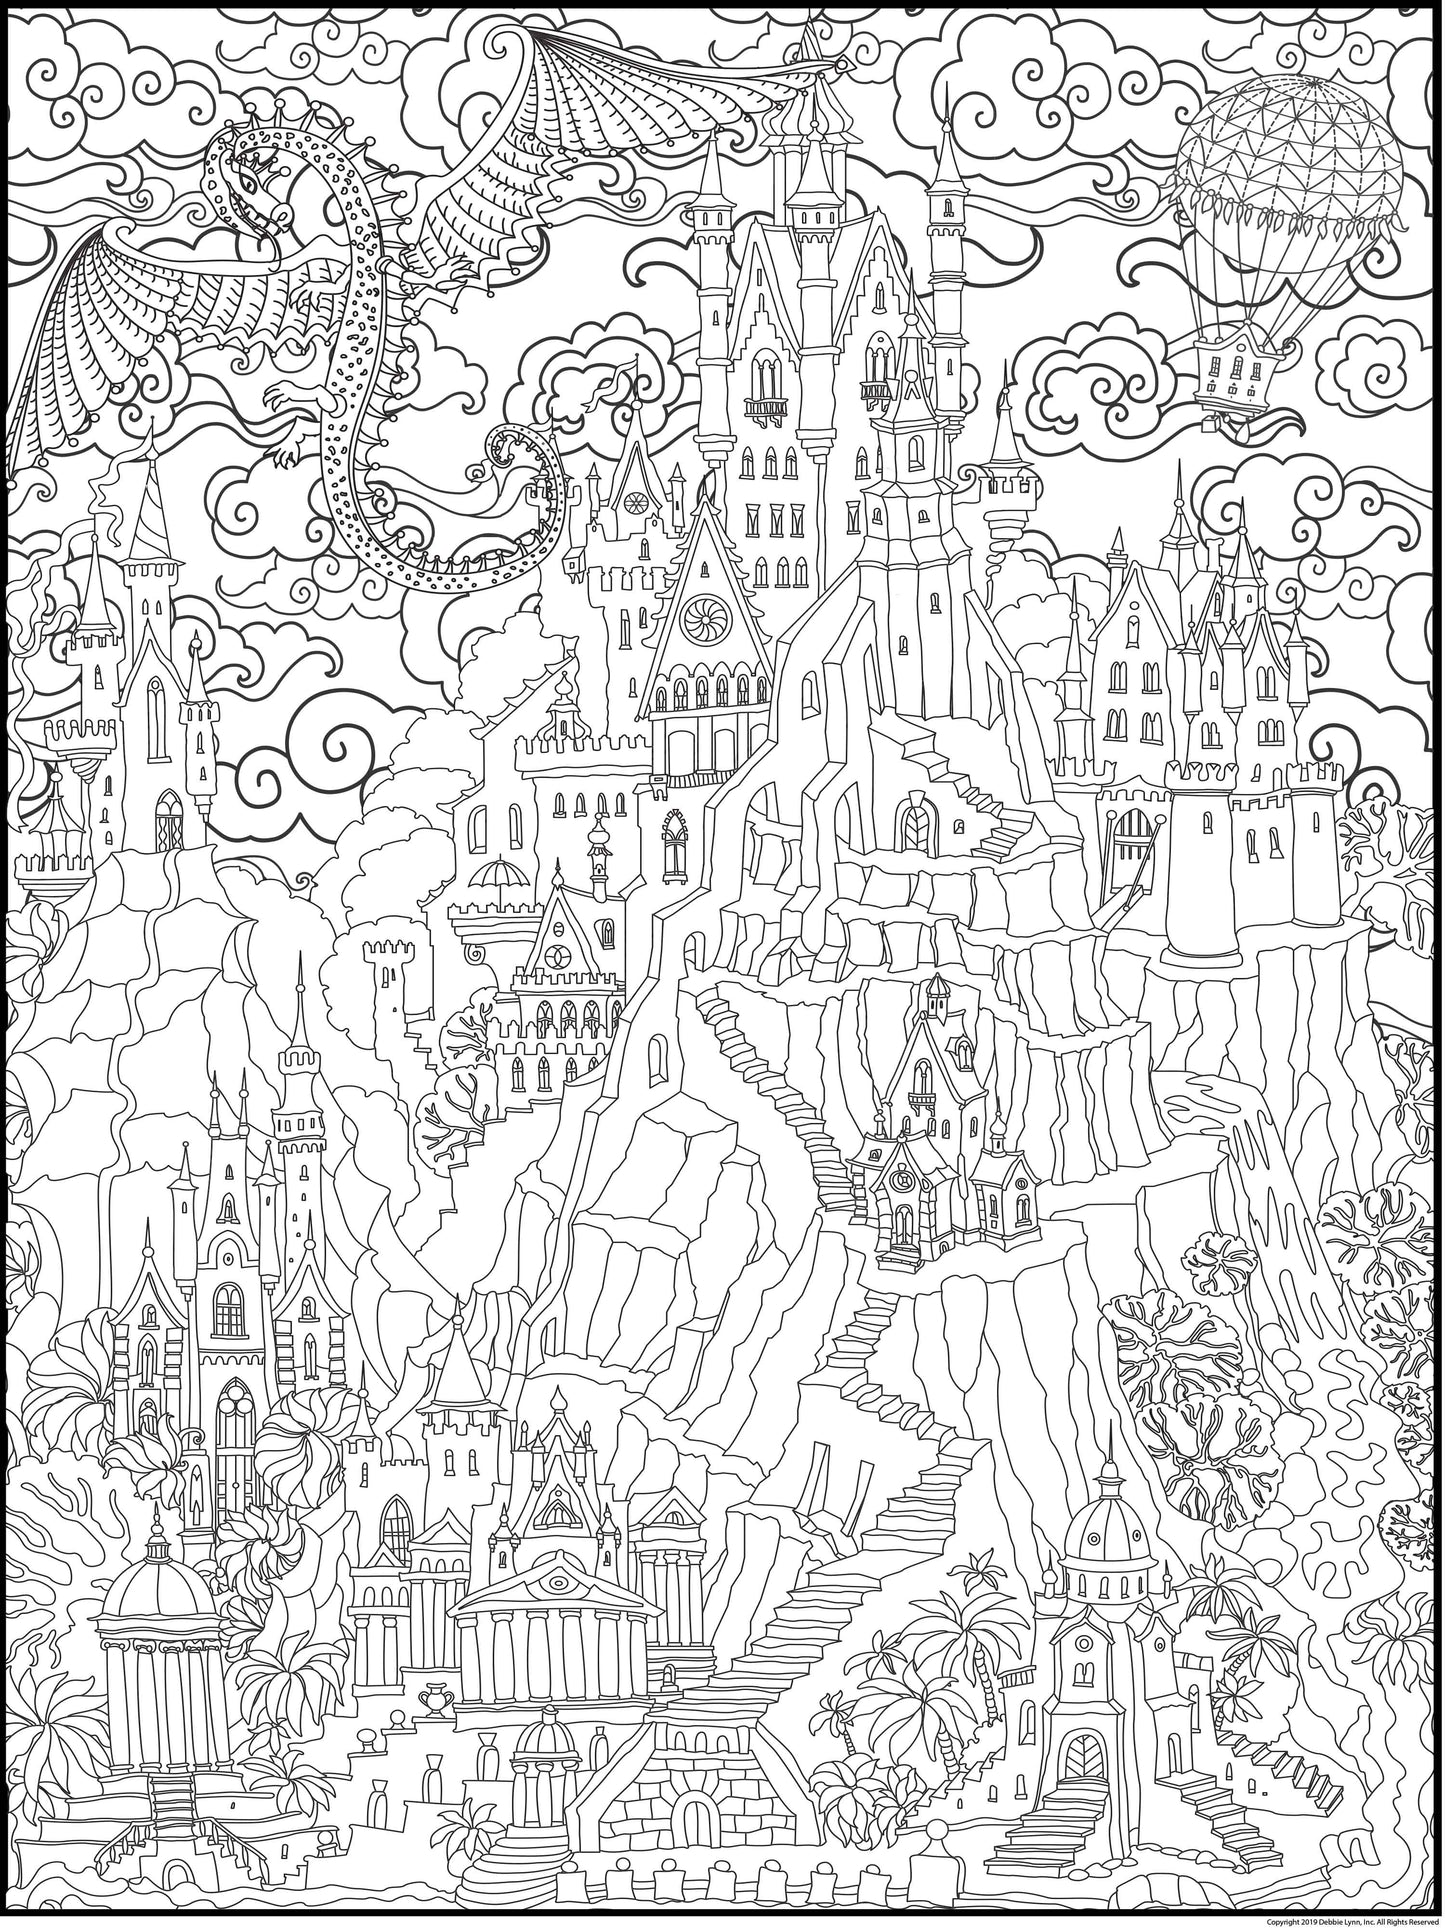 Fantasy Castle Personalized Giant Coloring Poster 46"x60"